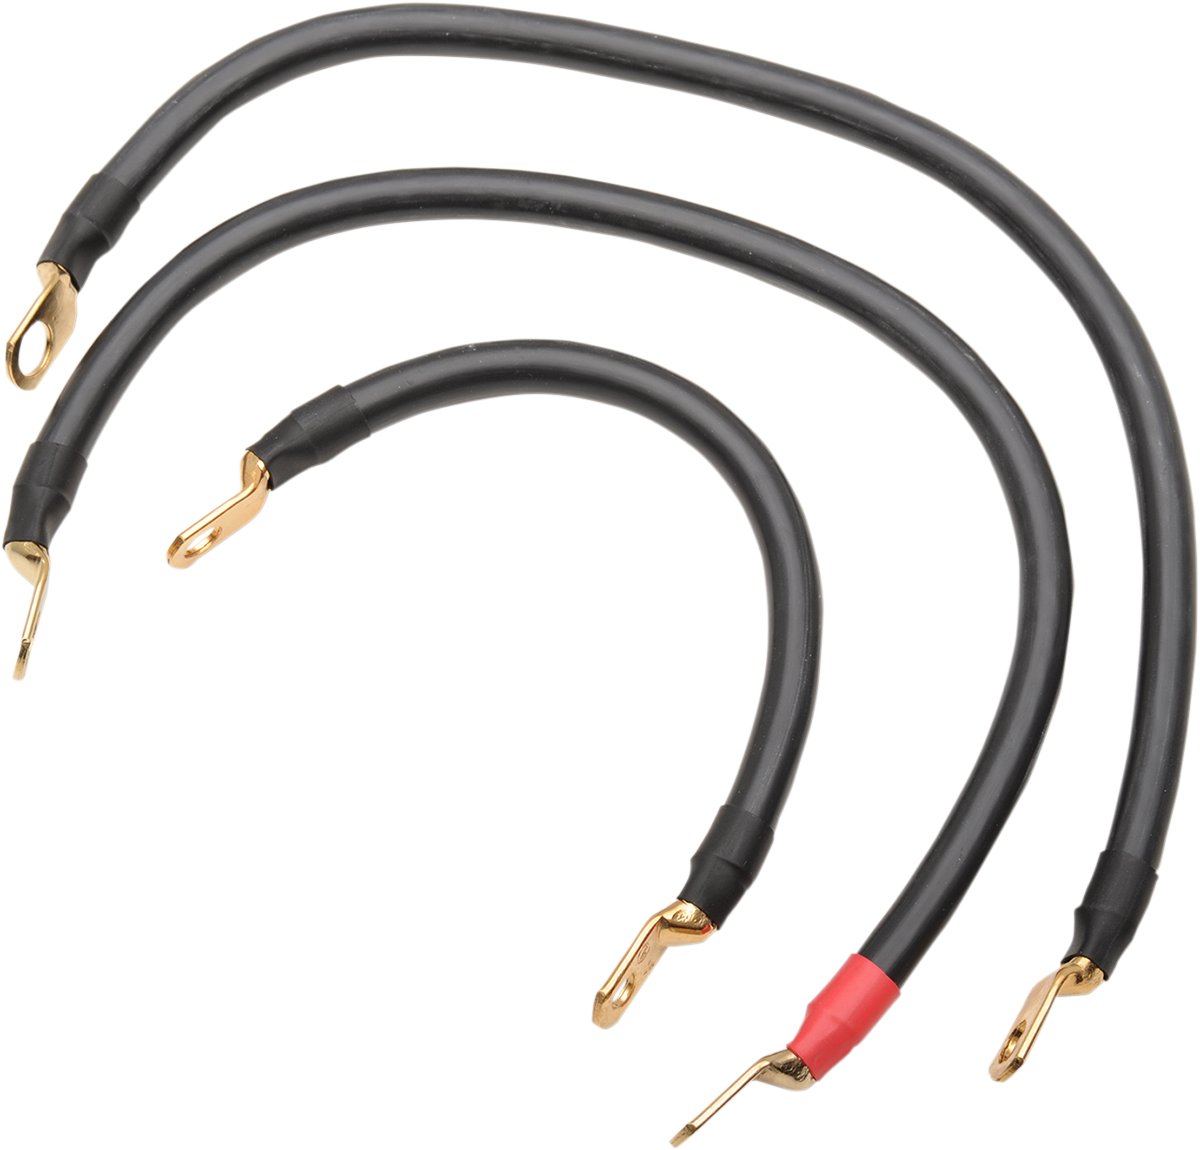 TERRY COMPONENTS Battery Cables - Harley Davidson 22020